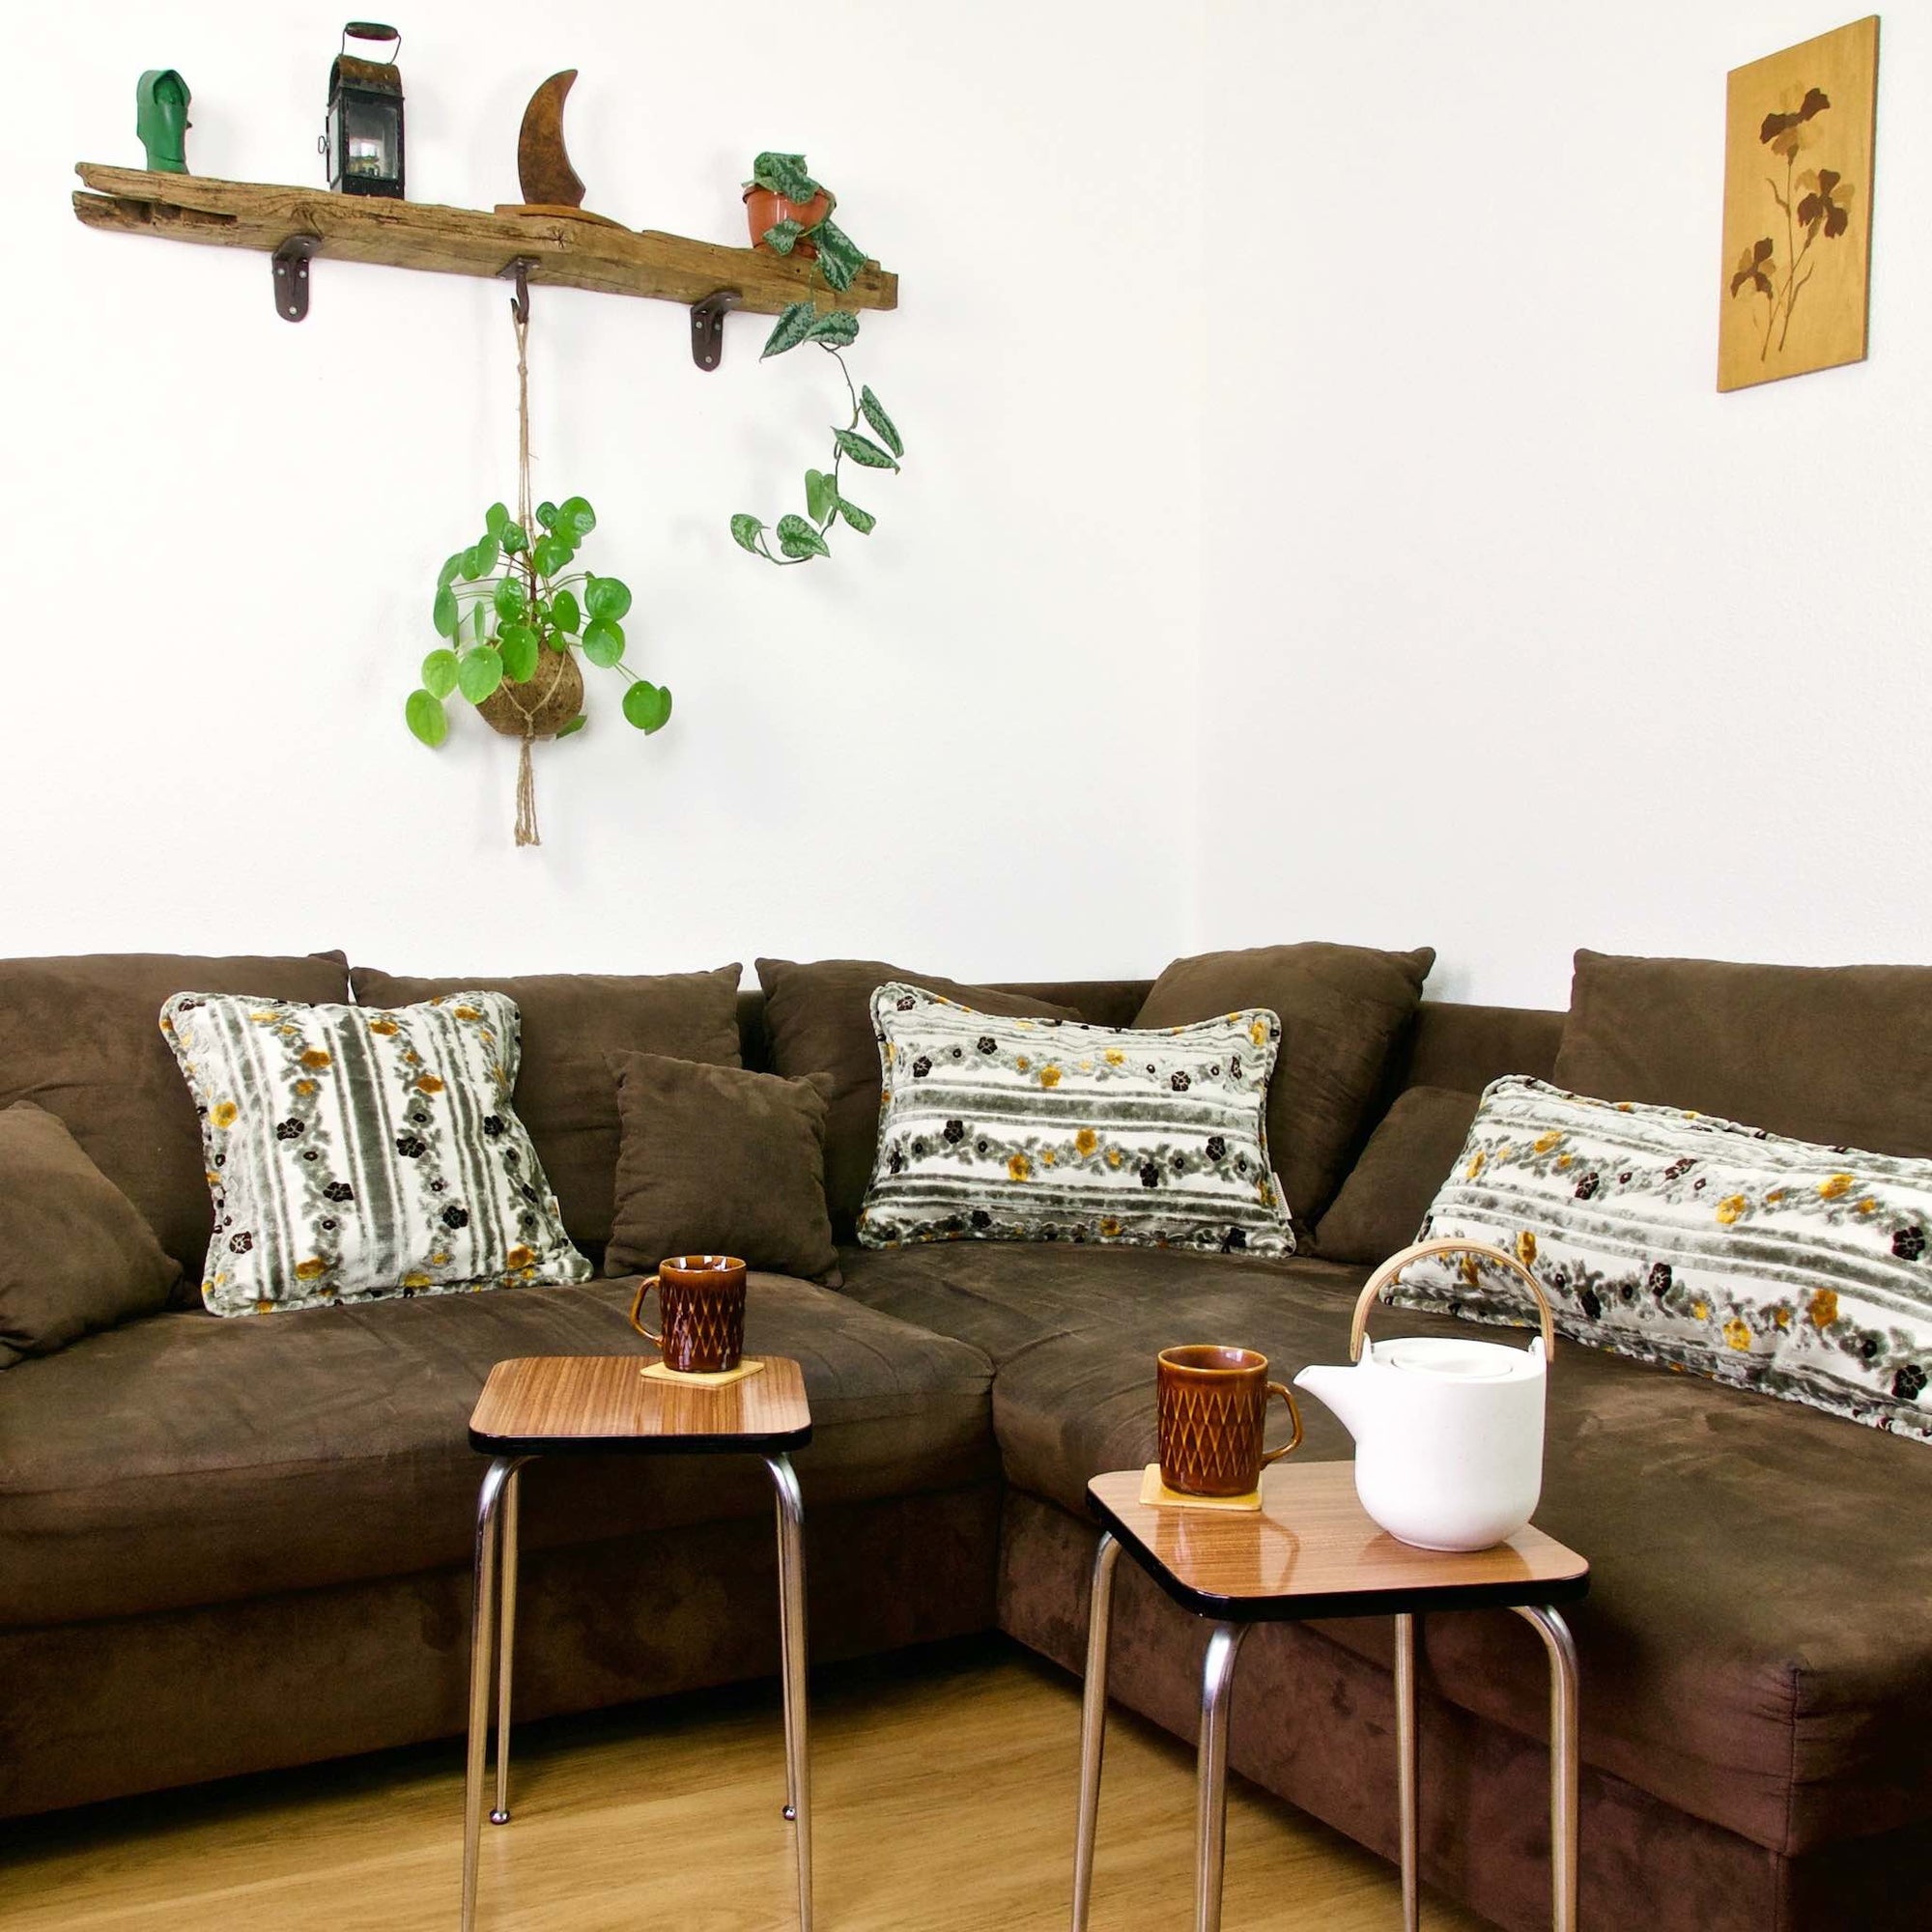 Three Cinnamon Love pillows on a brown couch in a living room.